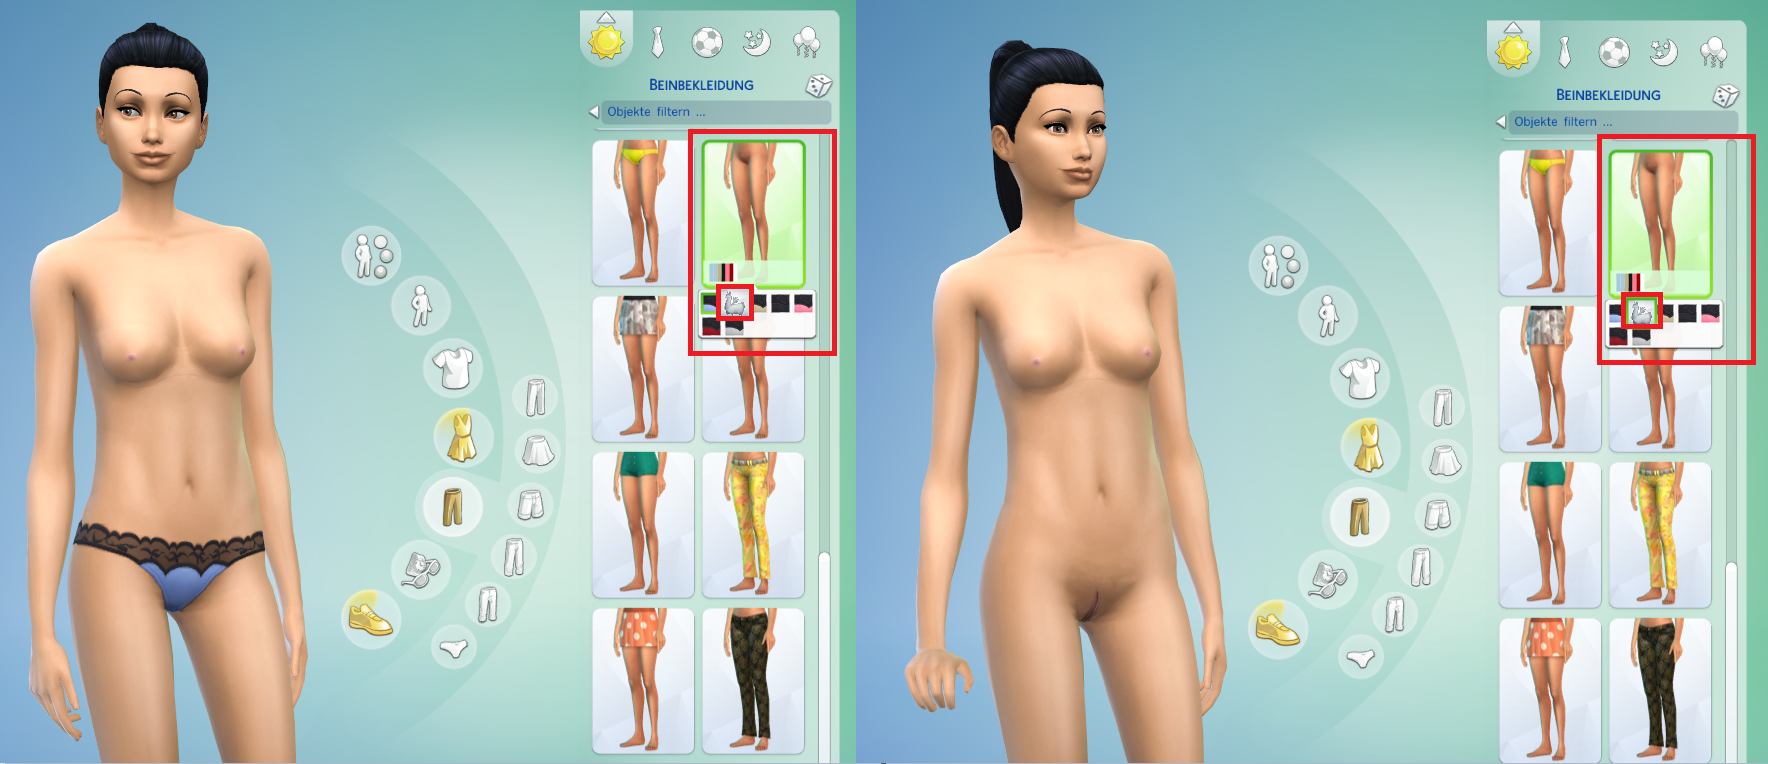 Sims 2 nude mods for v hentai photo